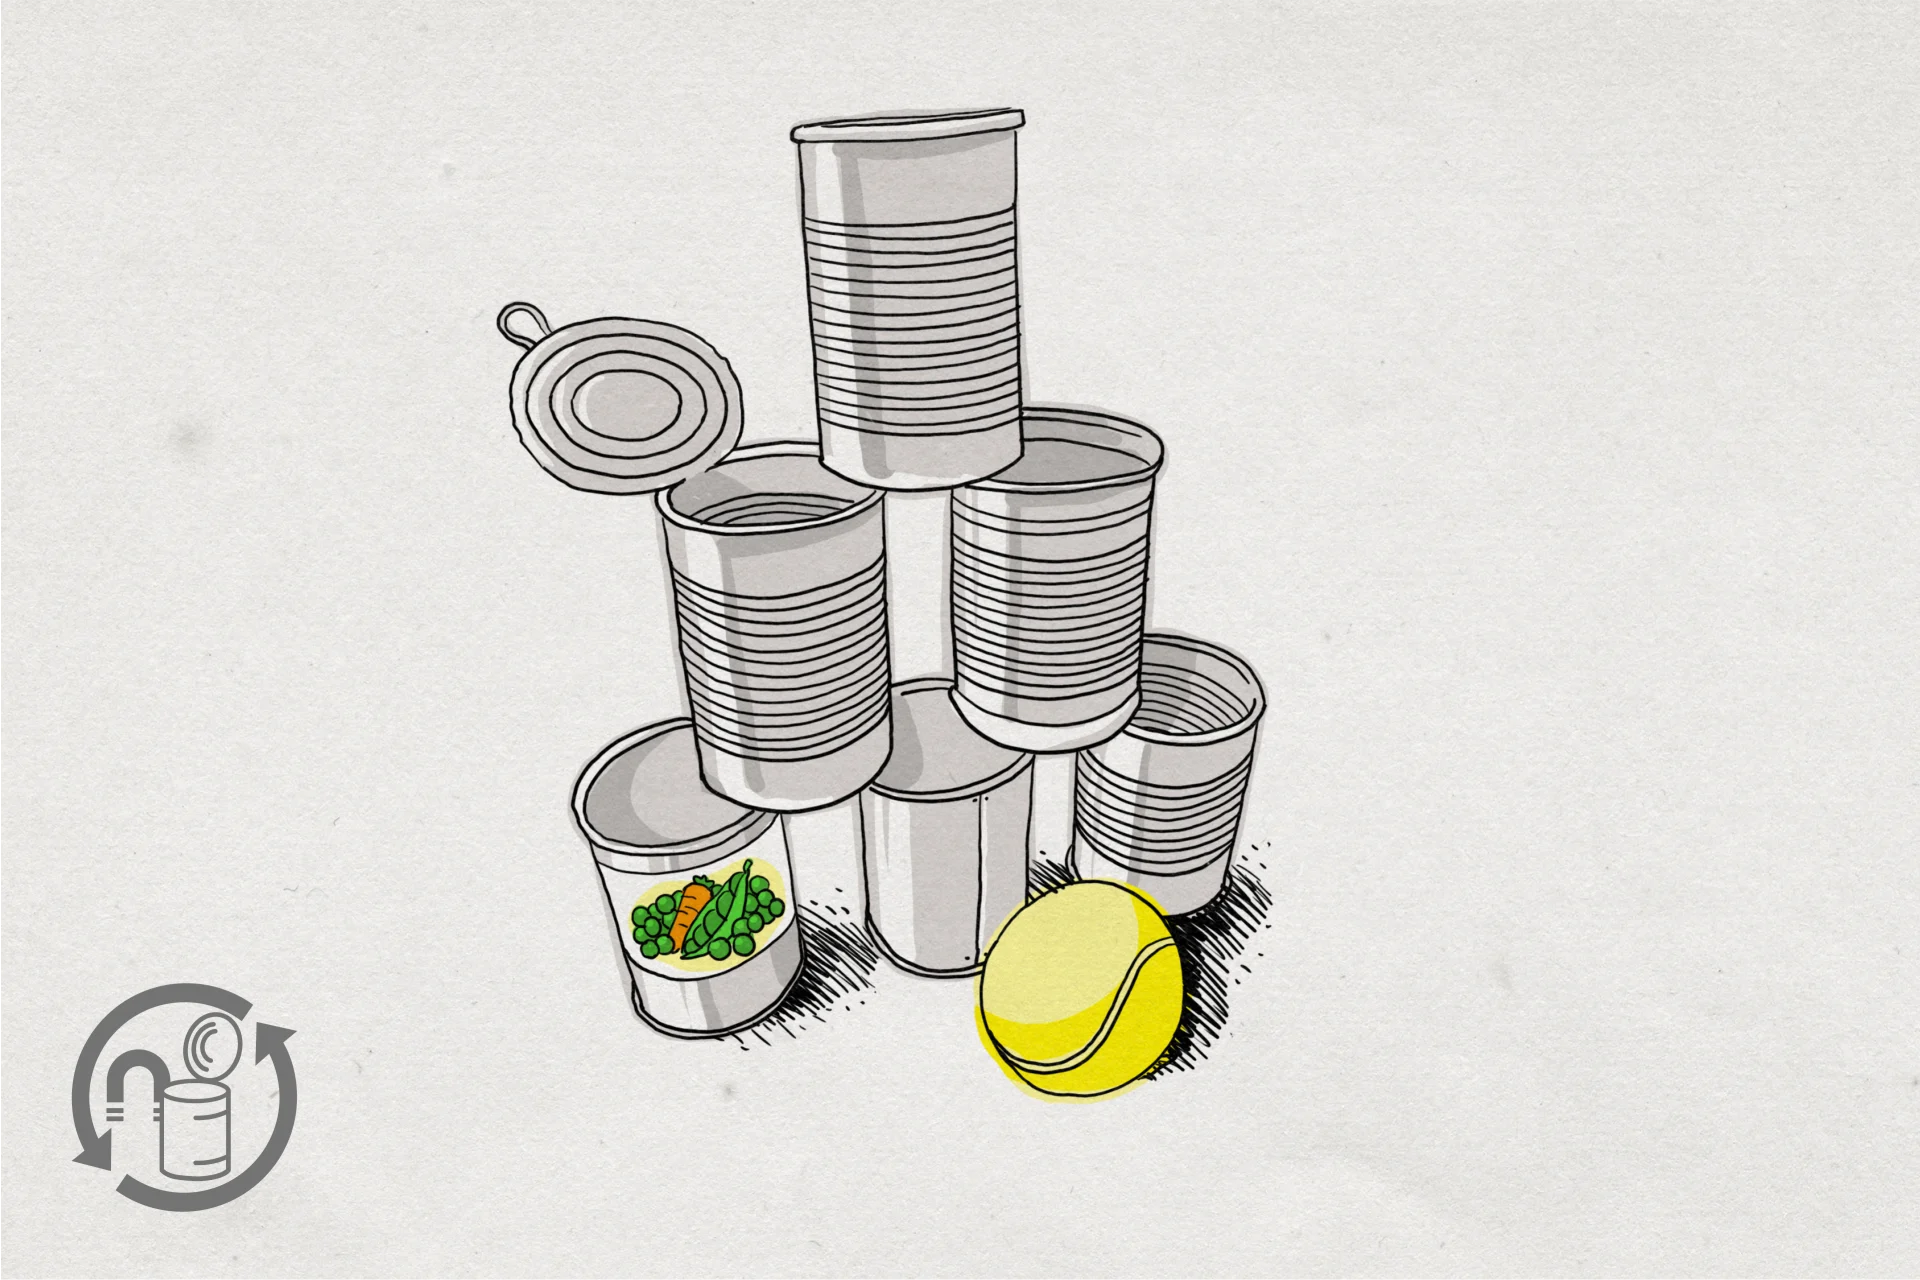 Illustration of a yellow tennis ball next to a stack of empty food tins.